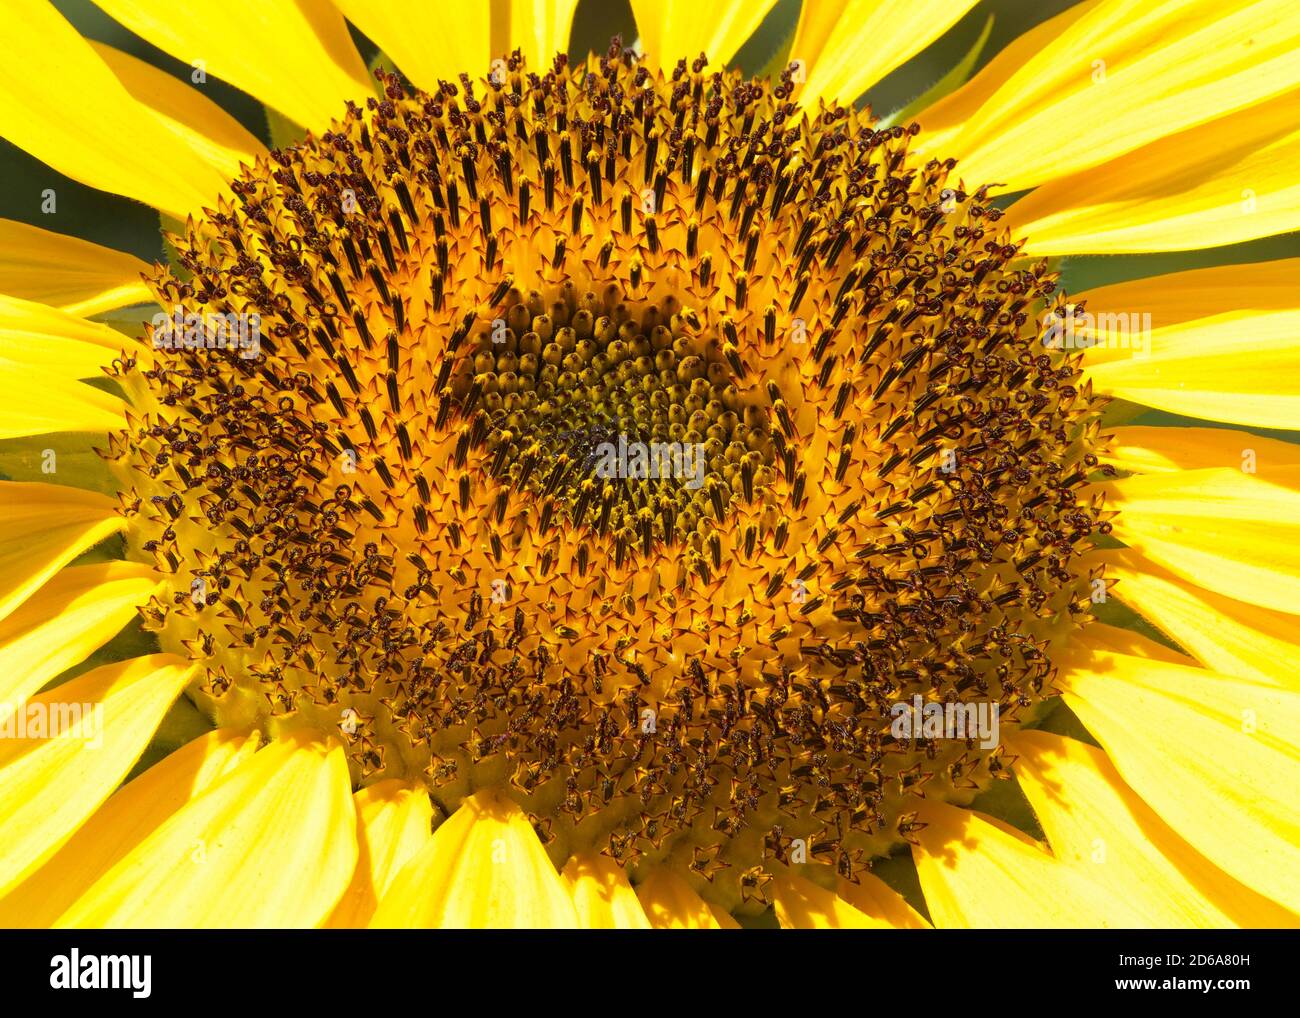 Close up on center of one Giant Sunflower in bright summer light, focus stacked for greater depth of field and detail. Stock Photo